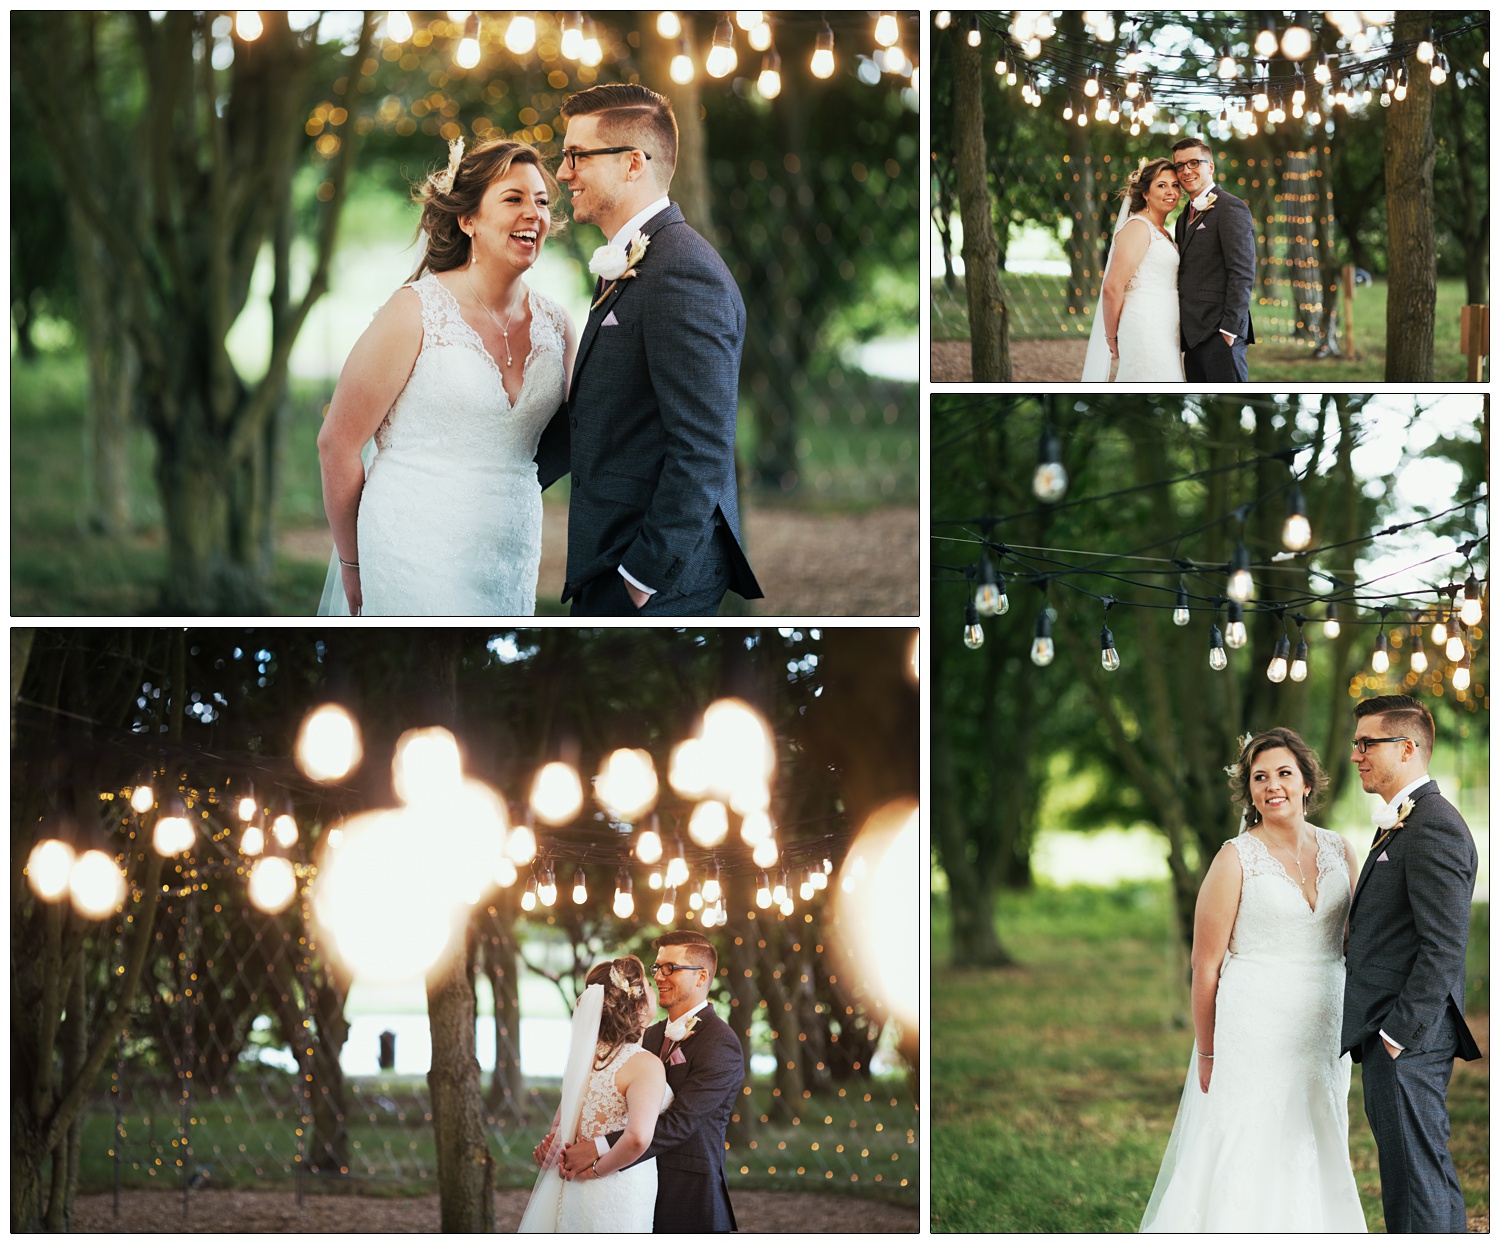 A bride and groom together standing near the trees and under fairy lights. At Fynn Valley Terrace.